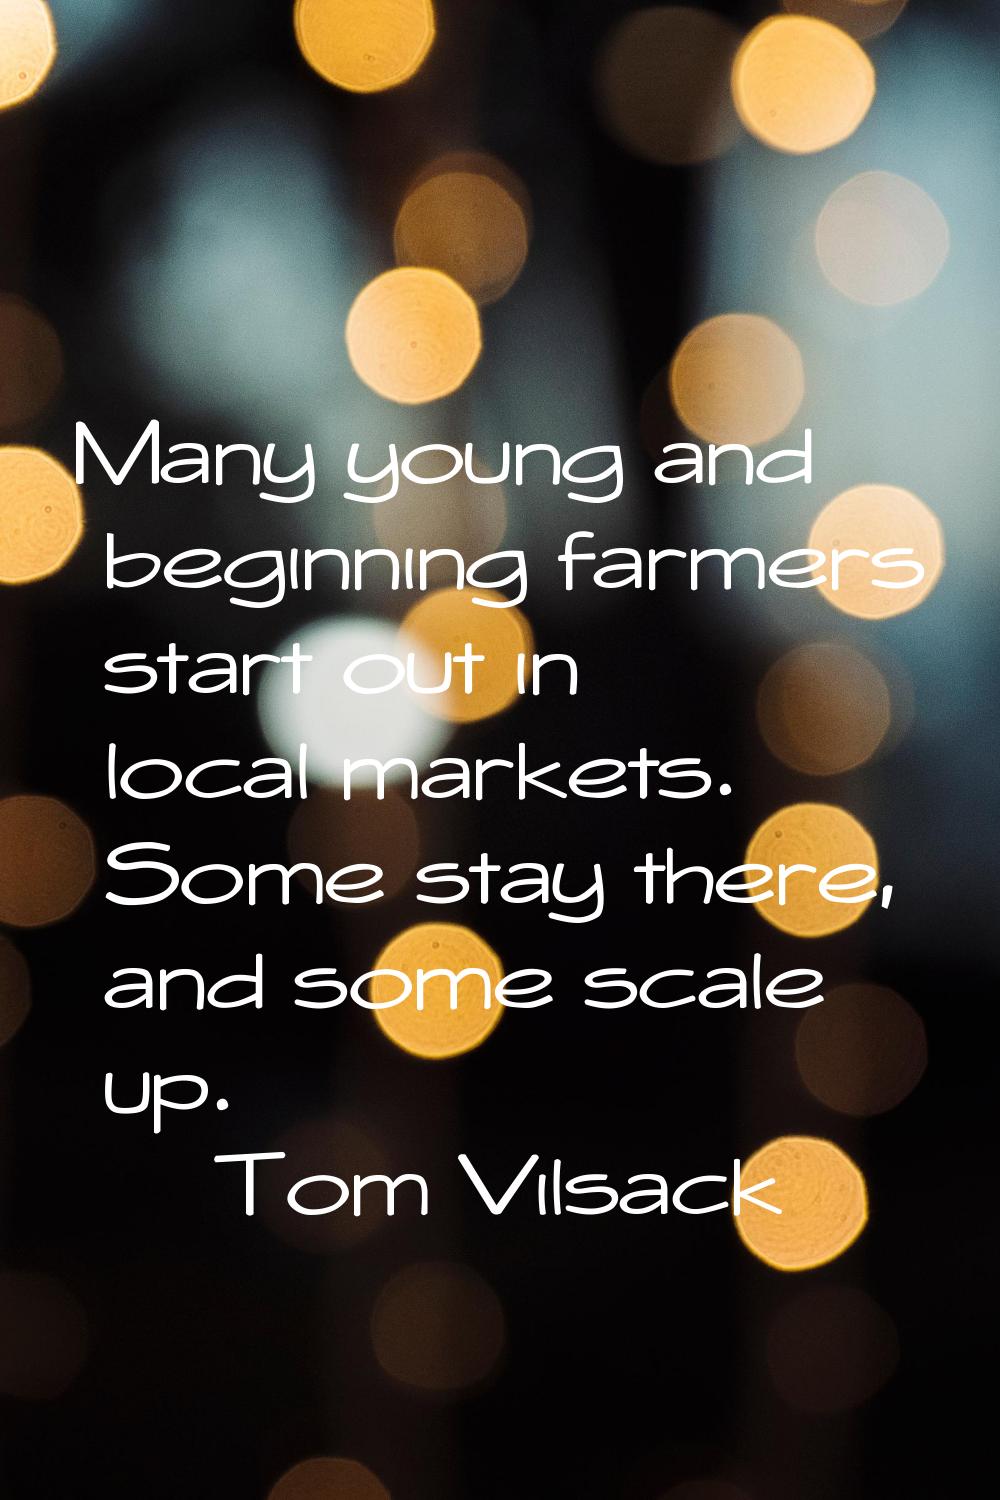 Many young and beginning farmers start out in local markets. Some stay there, and some scale up.